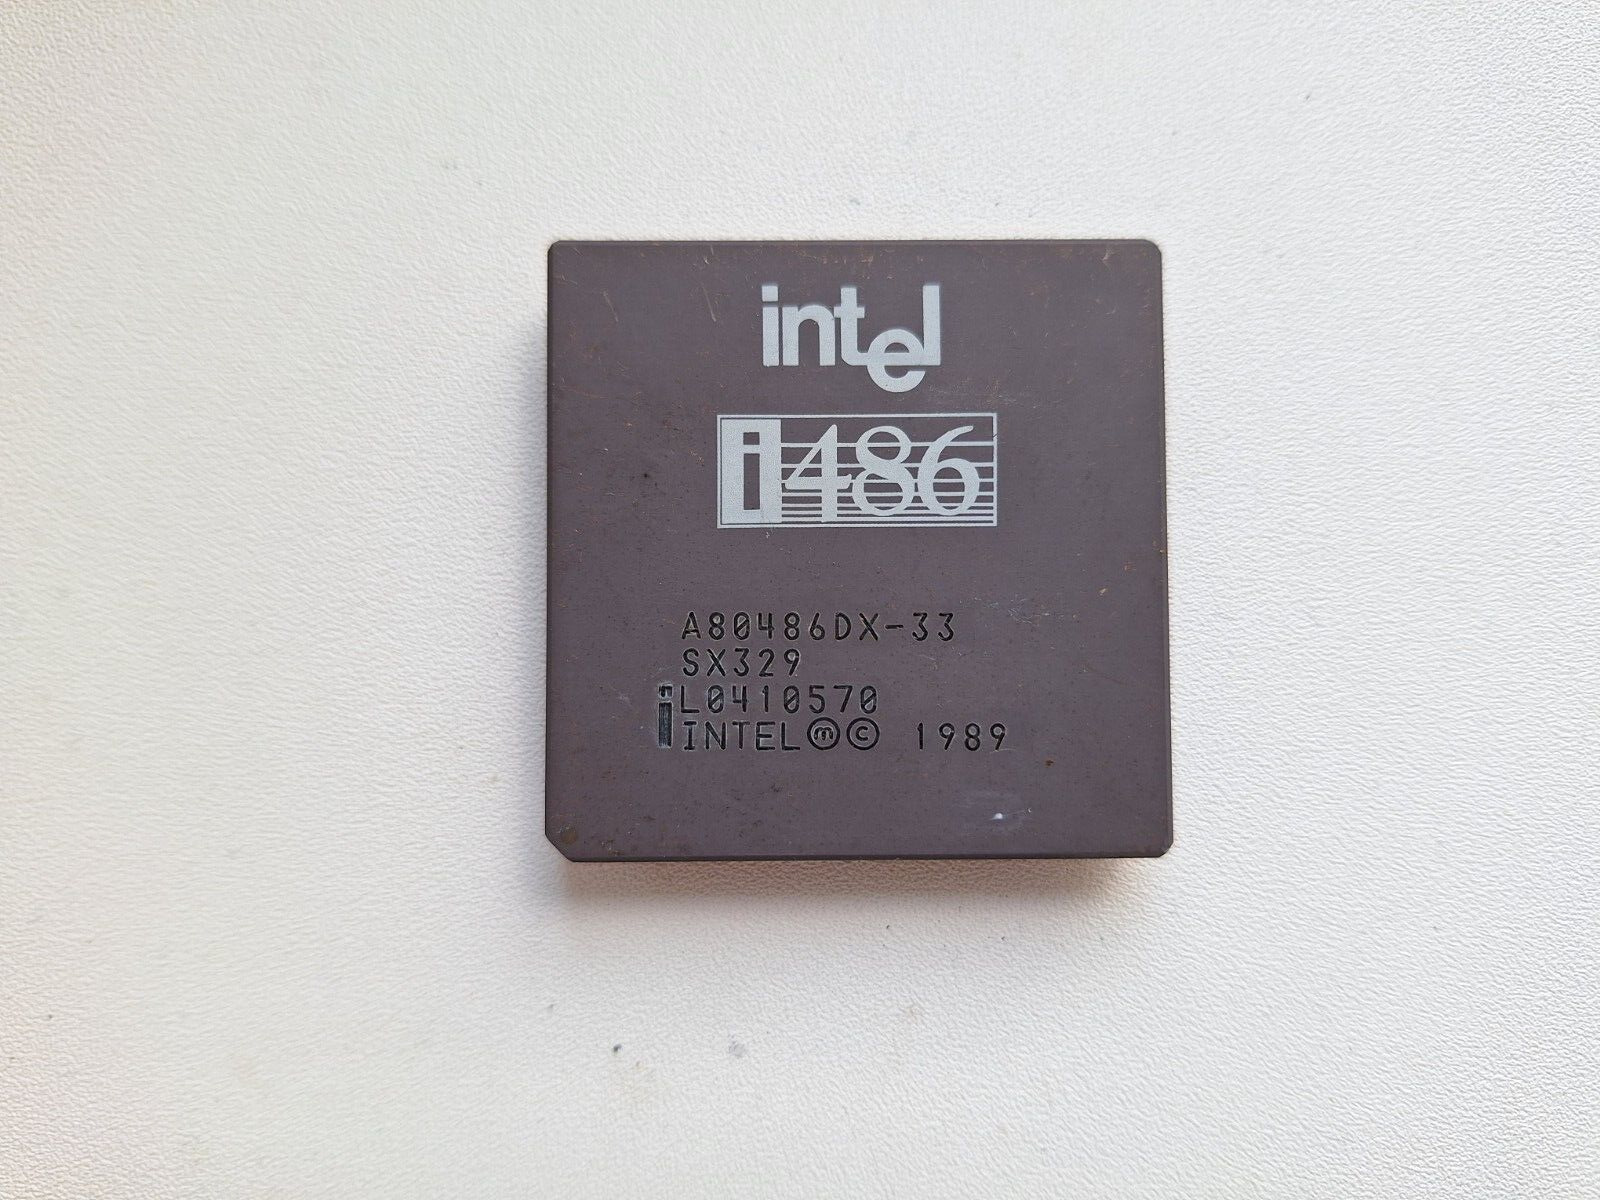 Intel A80486DX-33 SX329 486DX-33 old logo old date very rare vintage CPU GOLD